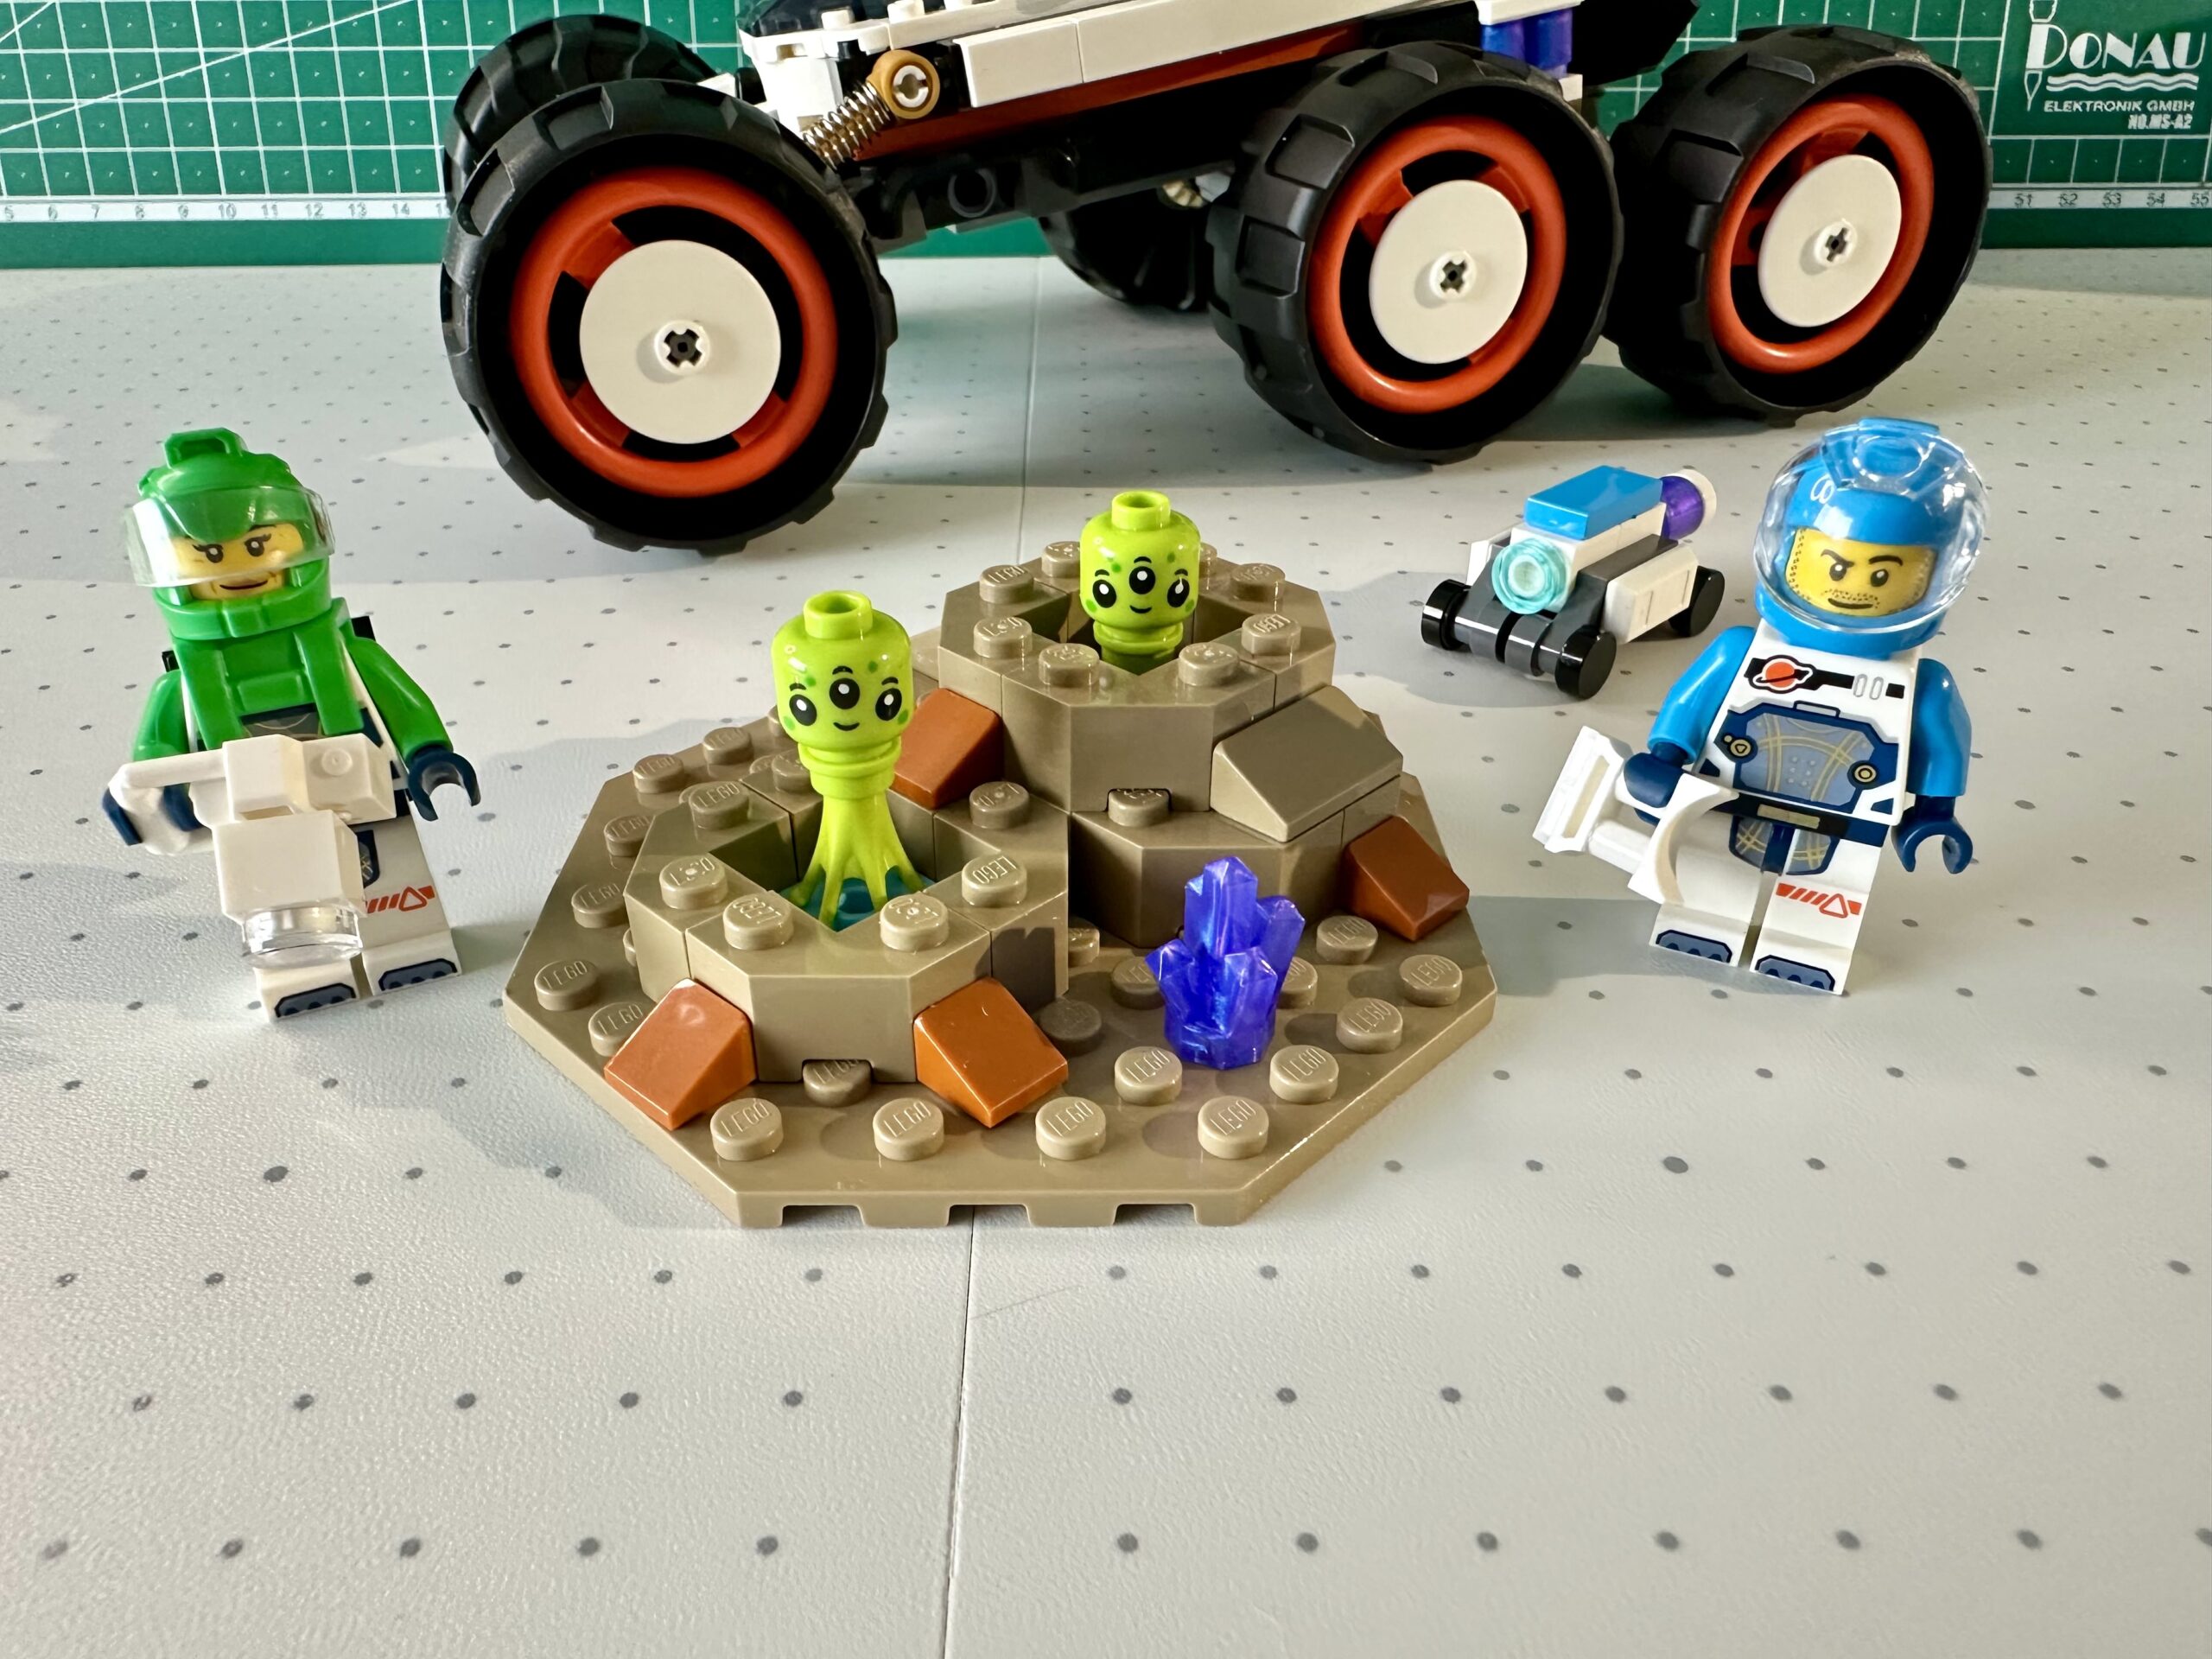 Green and azure-suited LEGO astronauts and a small wheeled robot flank a section of dark tan terrain with two craters. Happy looking 3-eyed lime green aliens sit in each crater.